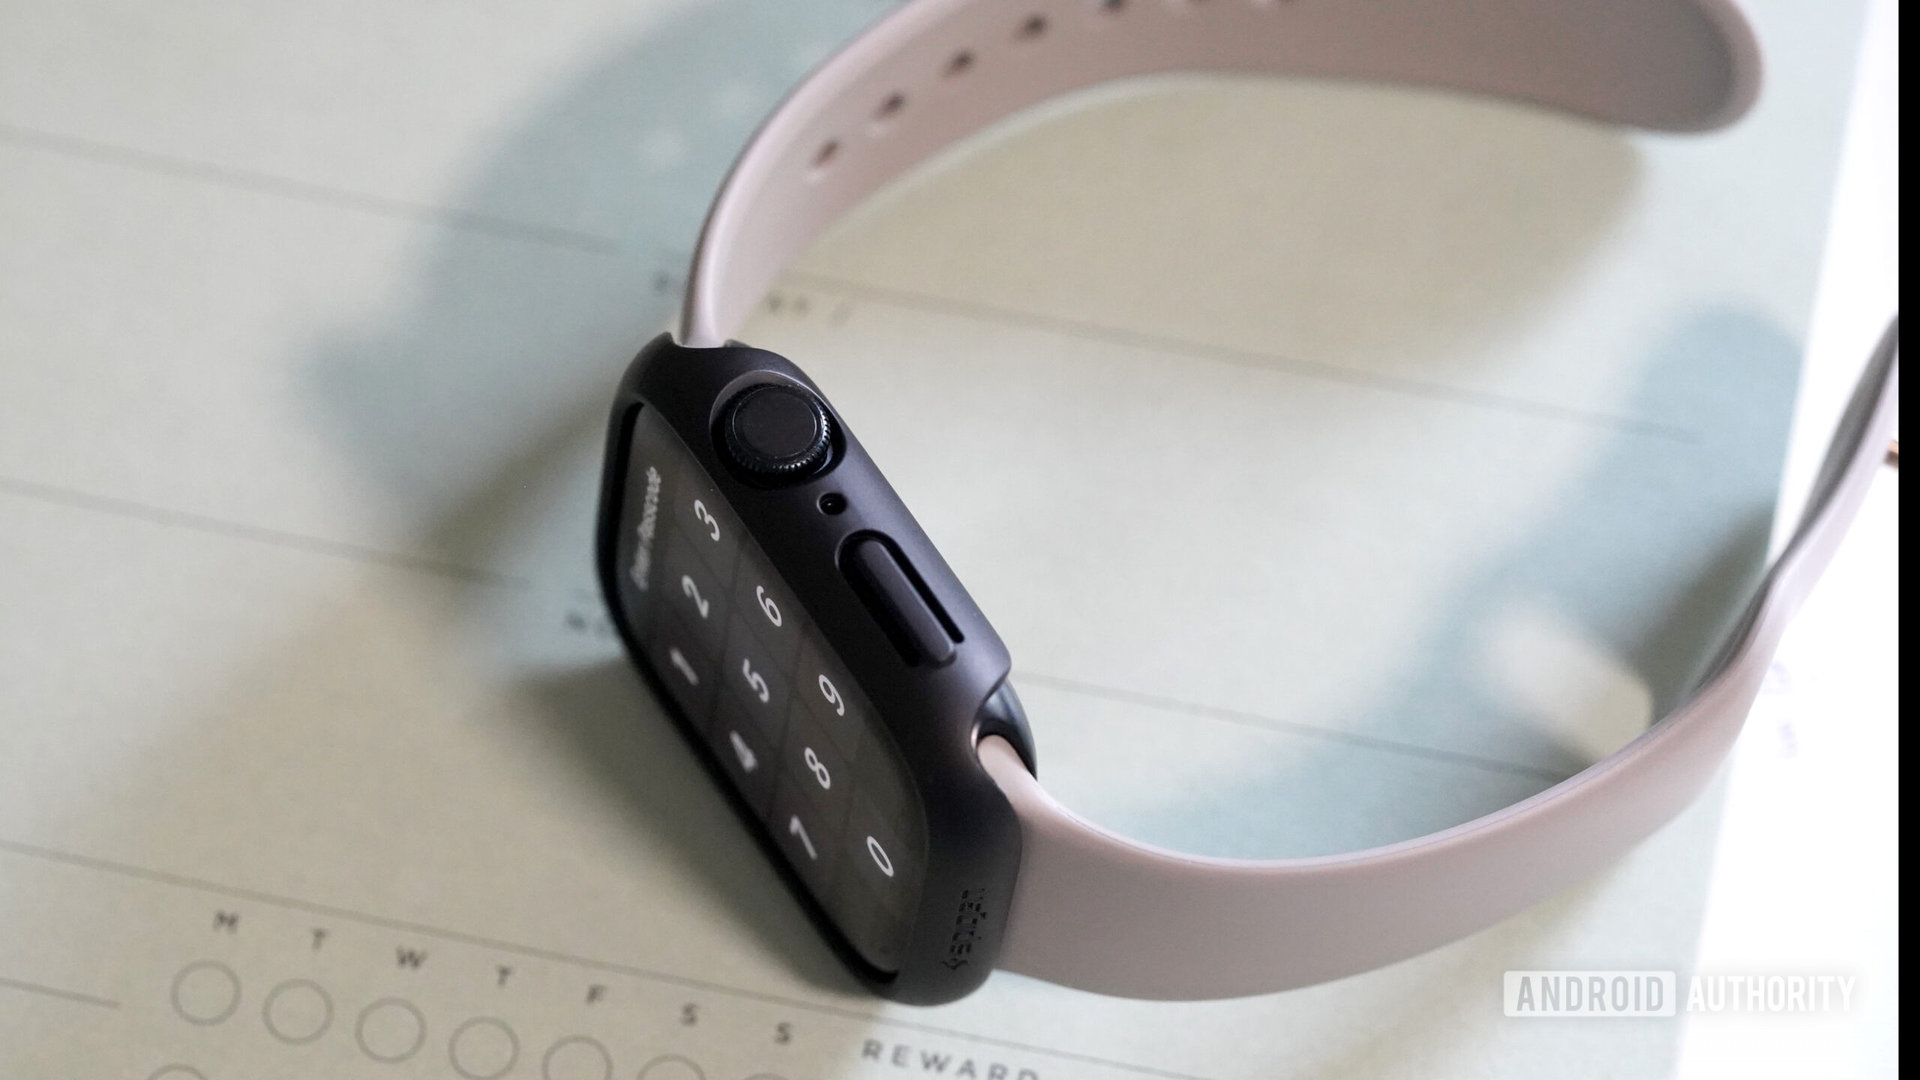 The Spigen Thin Fit features a precise cut out for the Apple Watch Digital Crown.